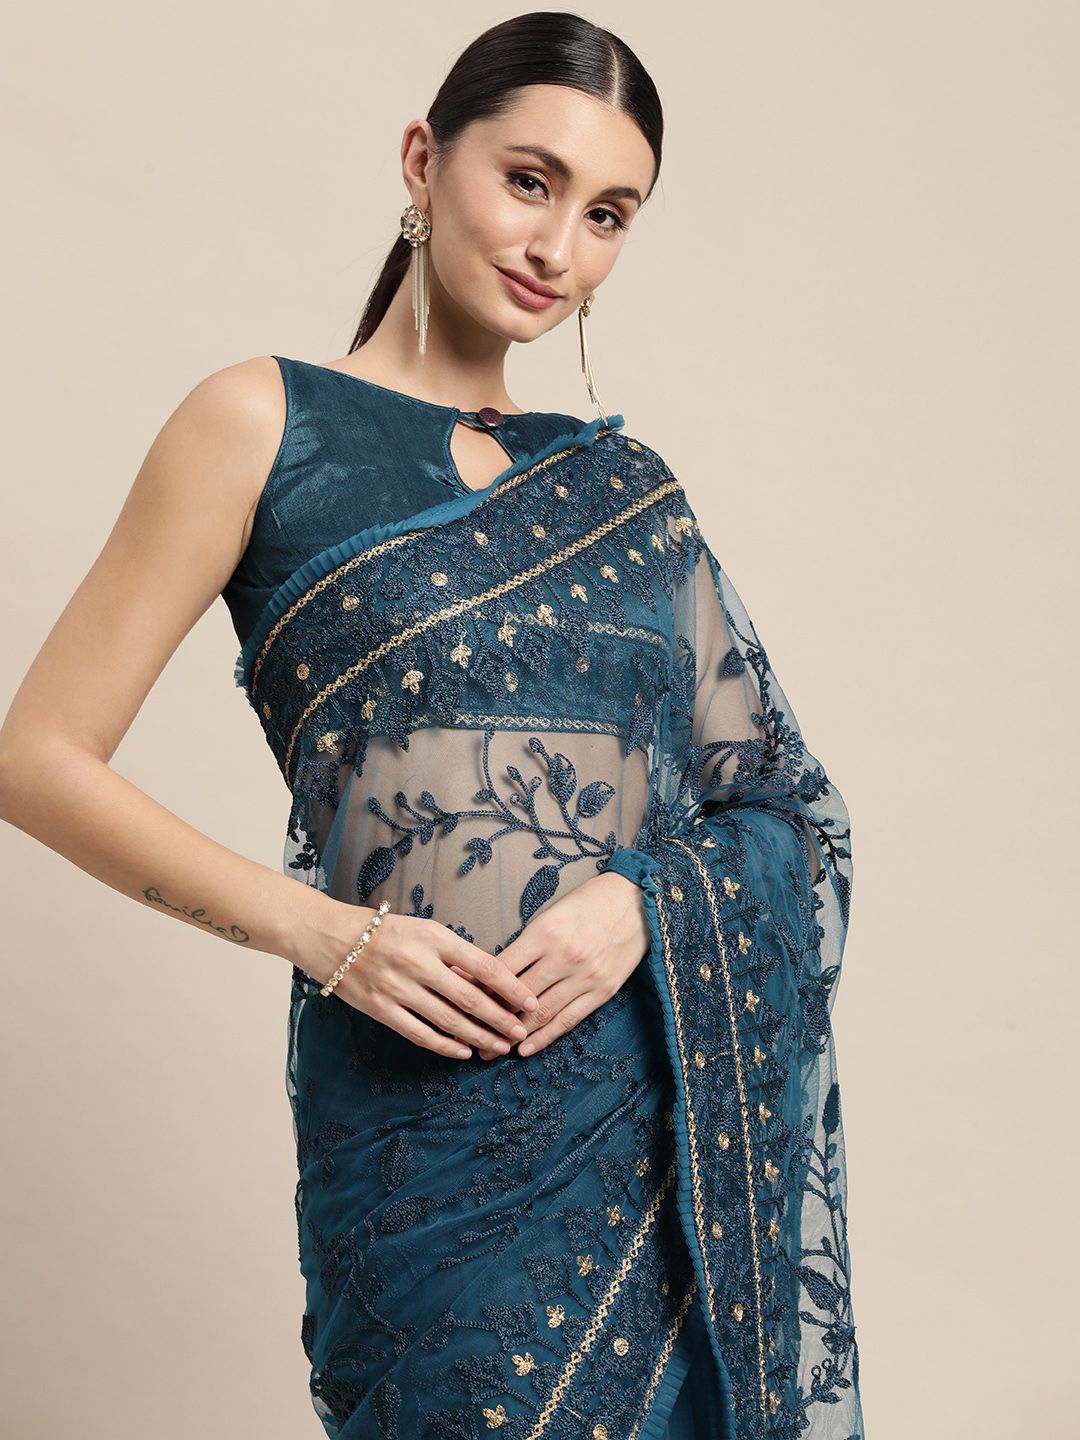 VAIRAGEE Teal Blue Floral Embroidered Net Saree Price in India